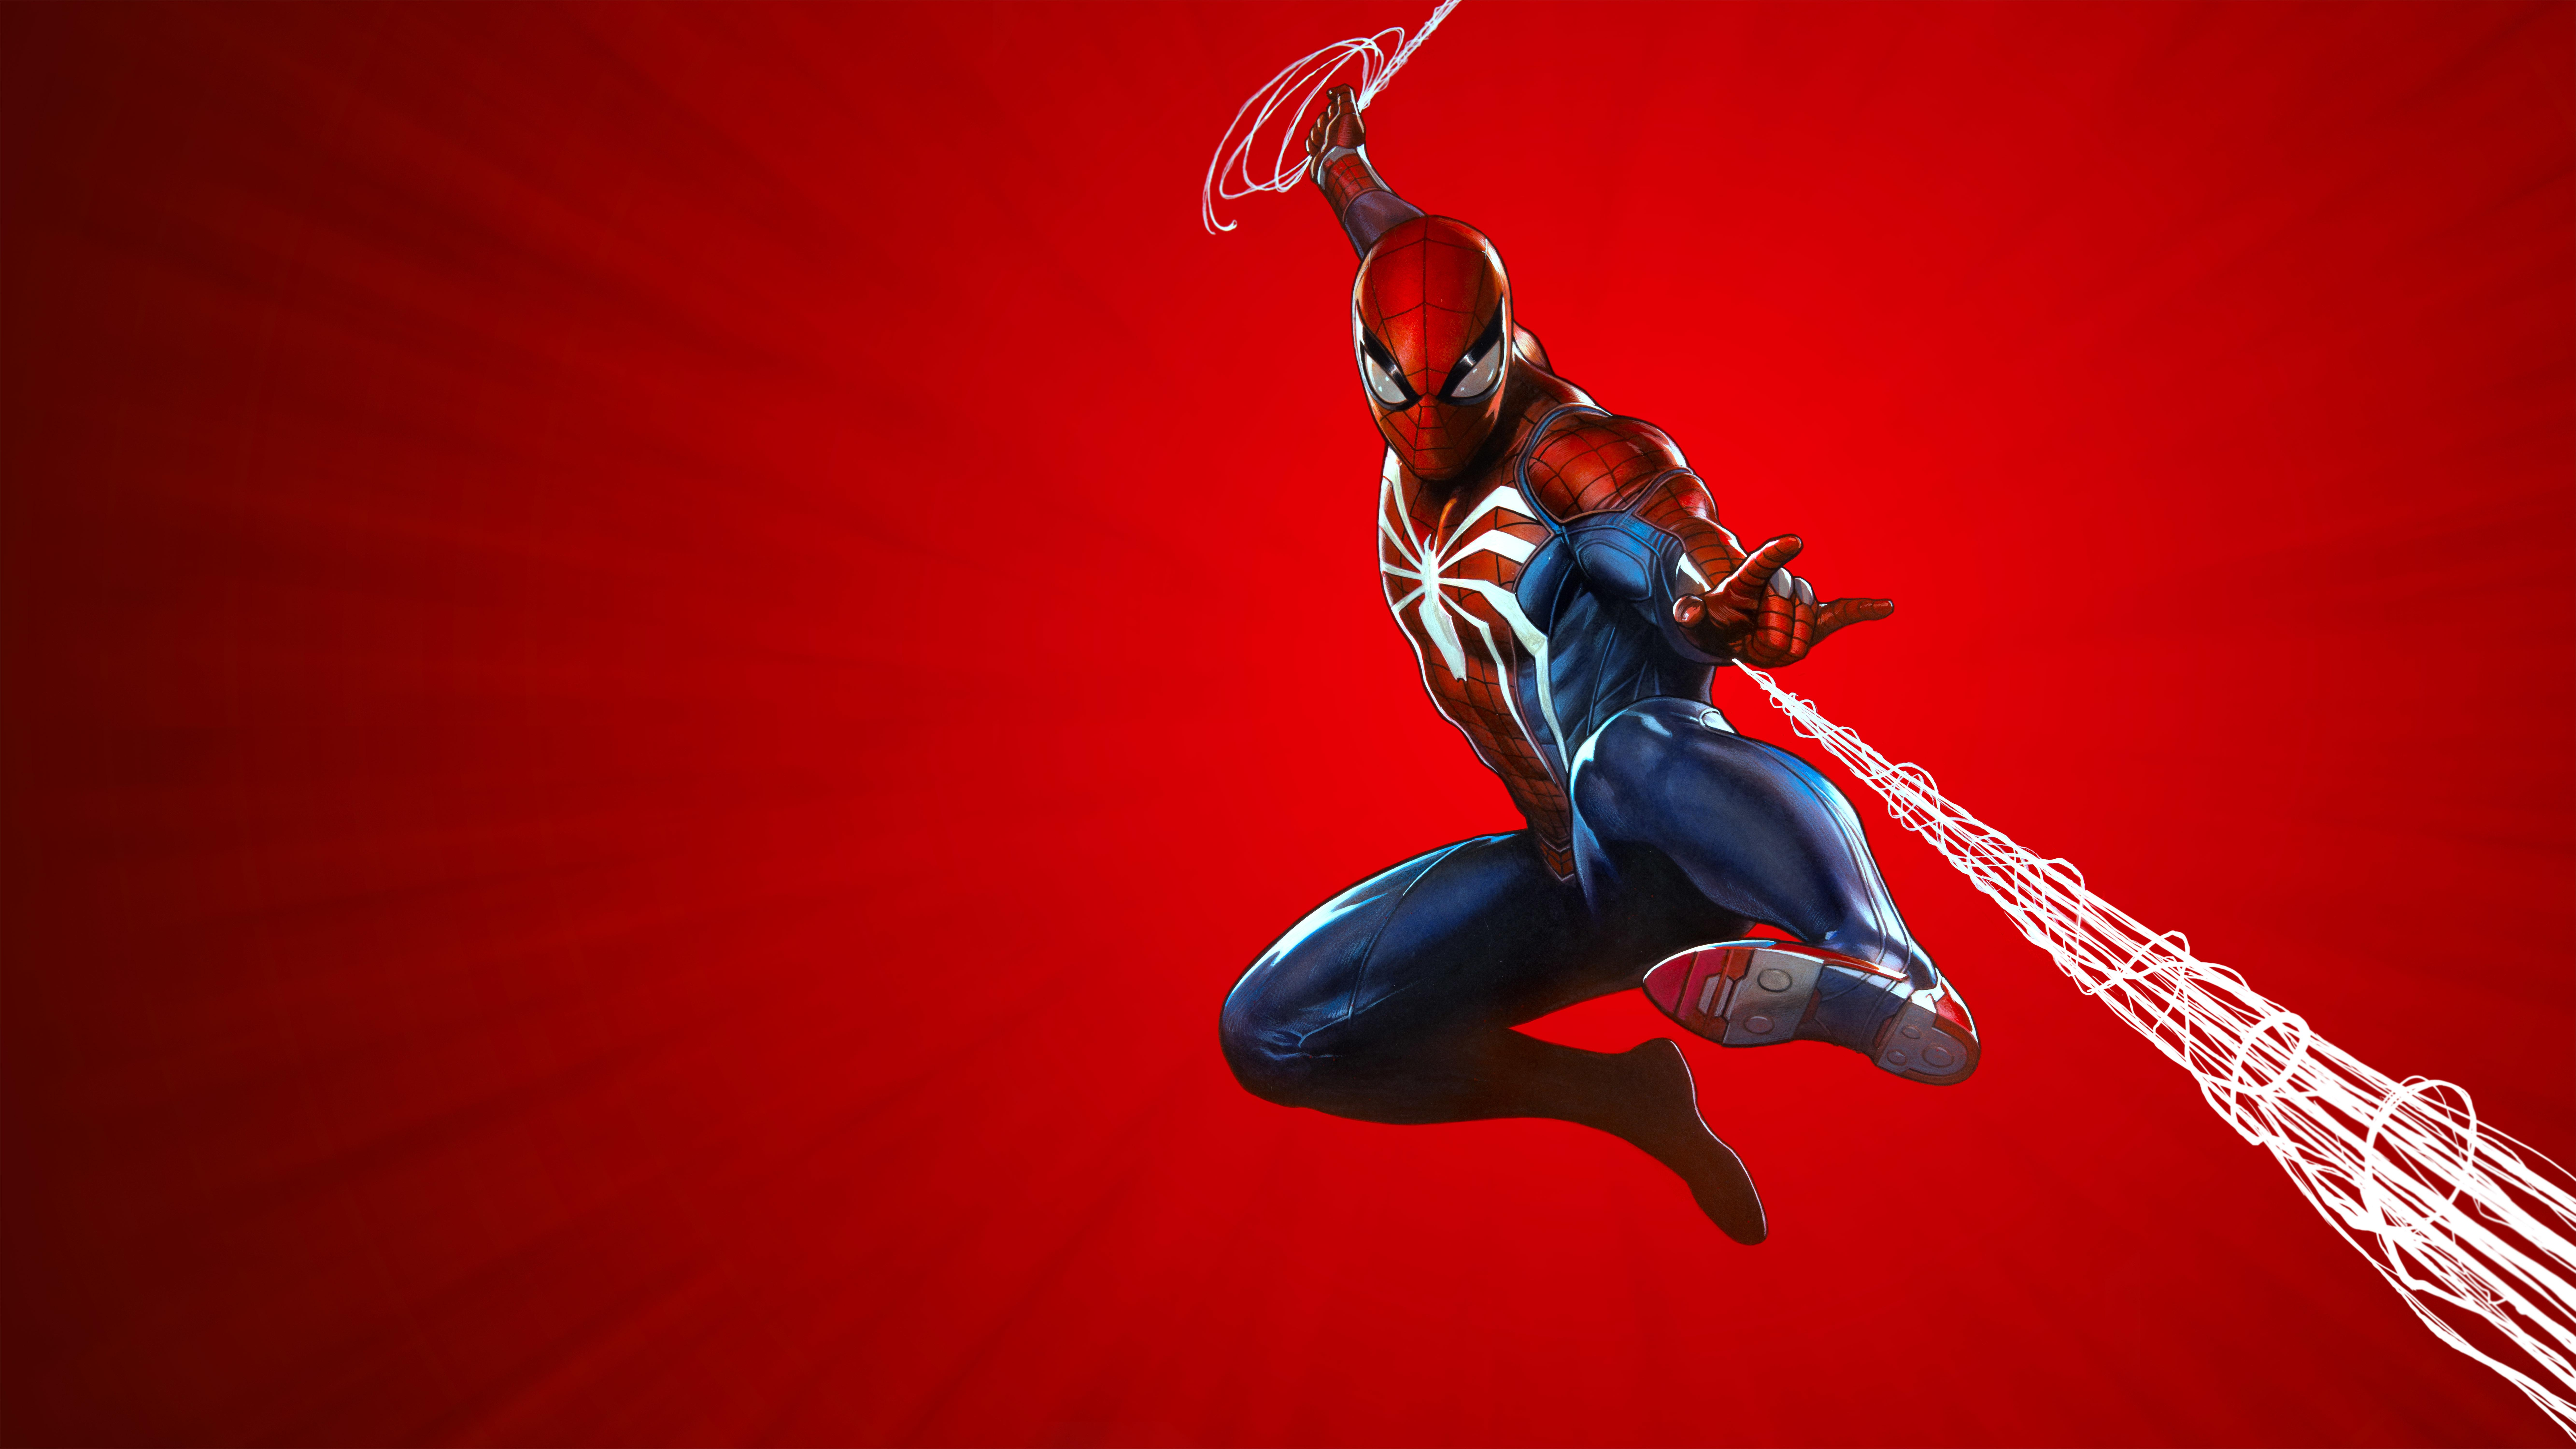 Spider Man PS4 Wallpaper, HD Games 4K Wallpaper, Image, Photo And Background